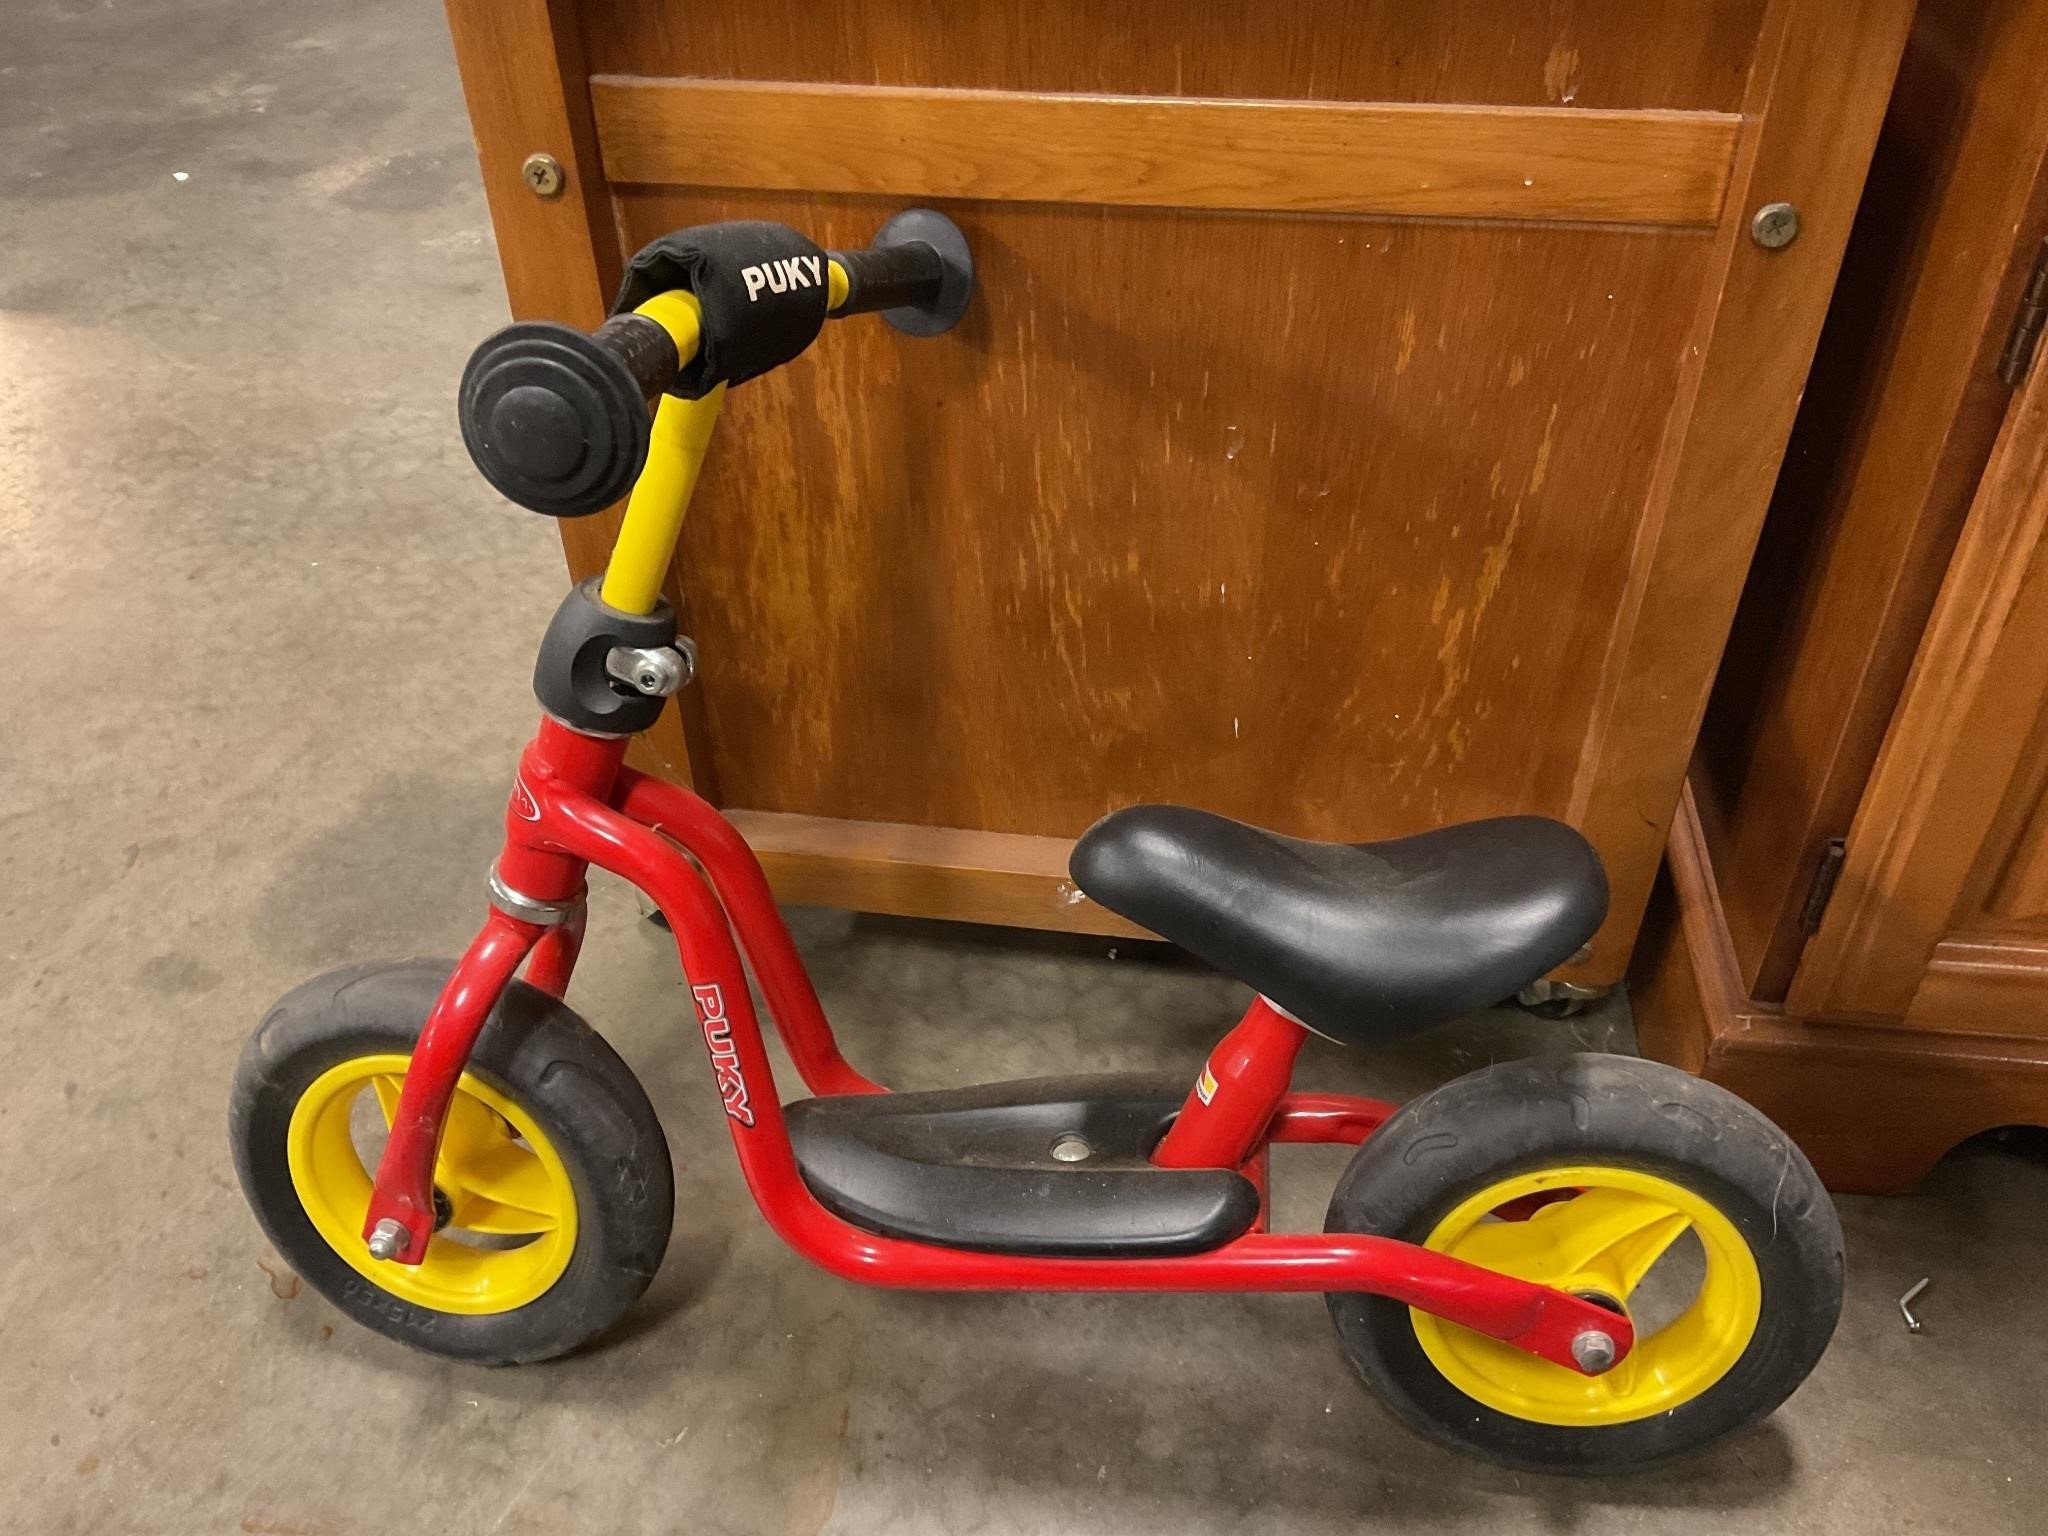 Small puky scooter